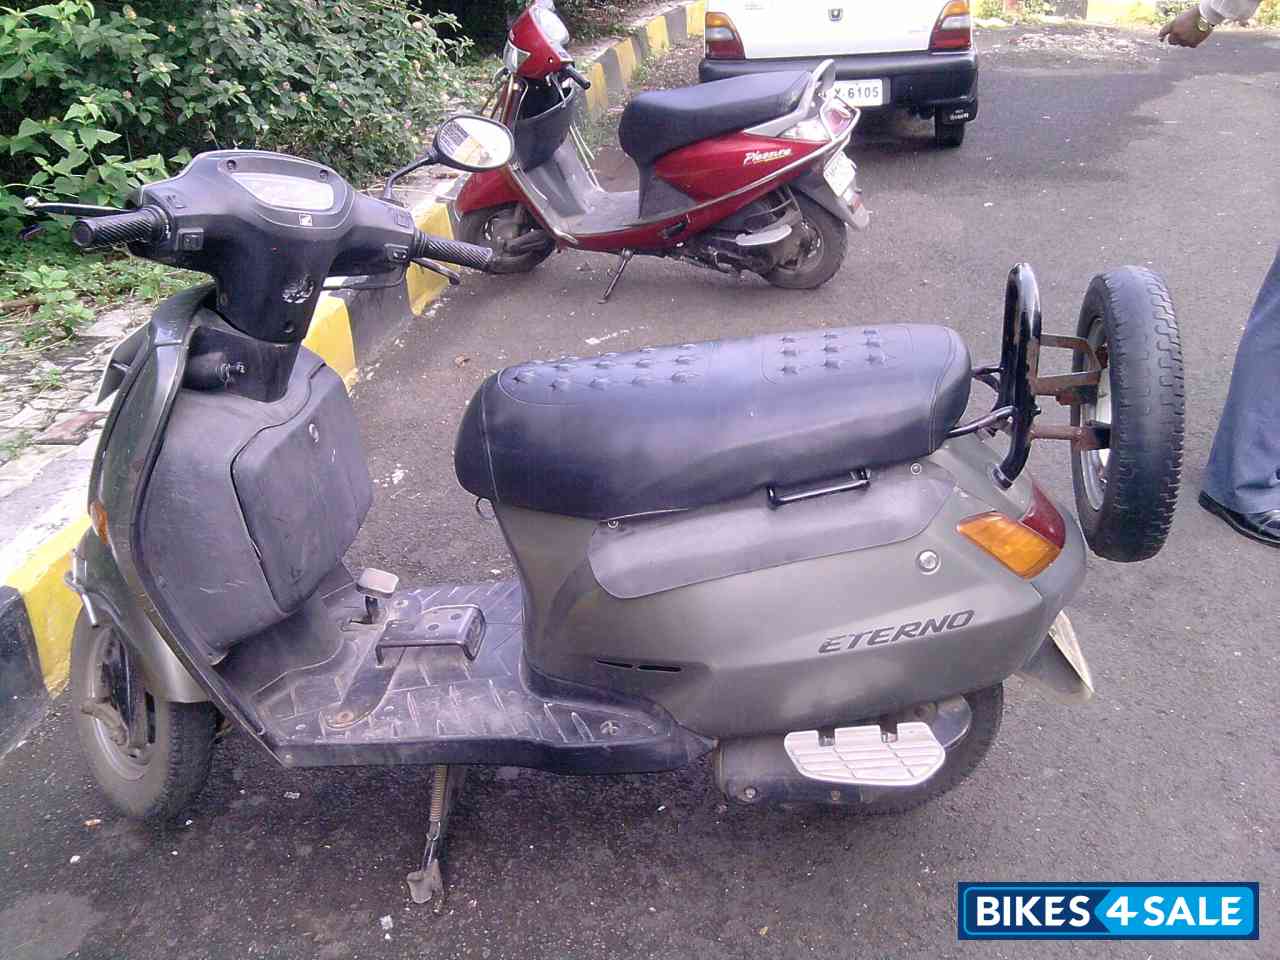 Honda eterno for sale in pune